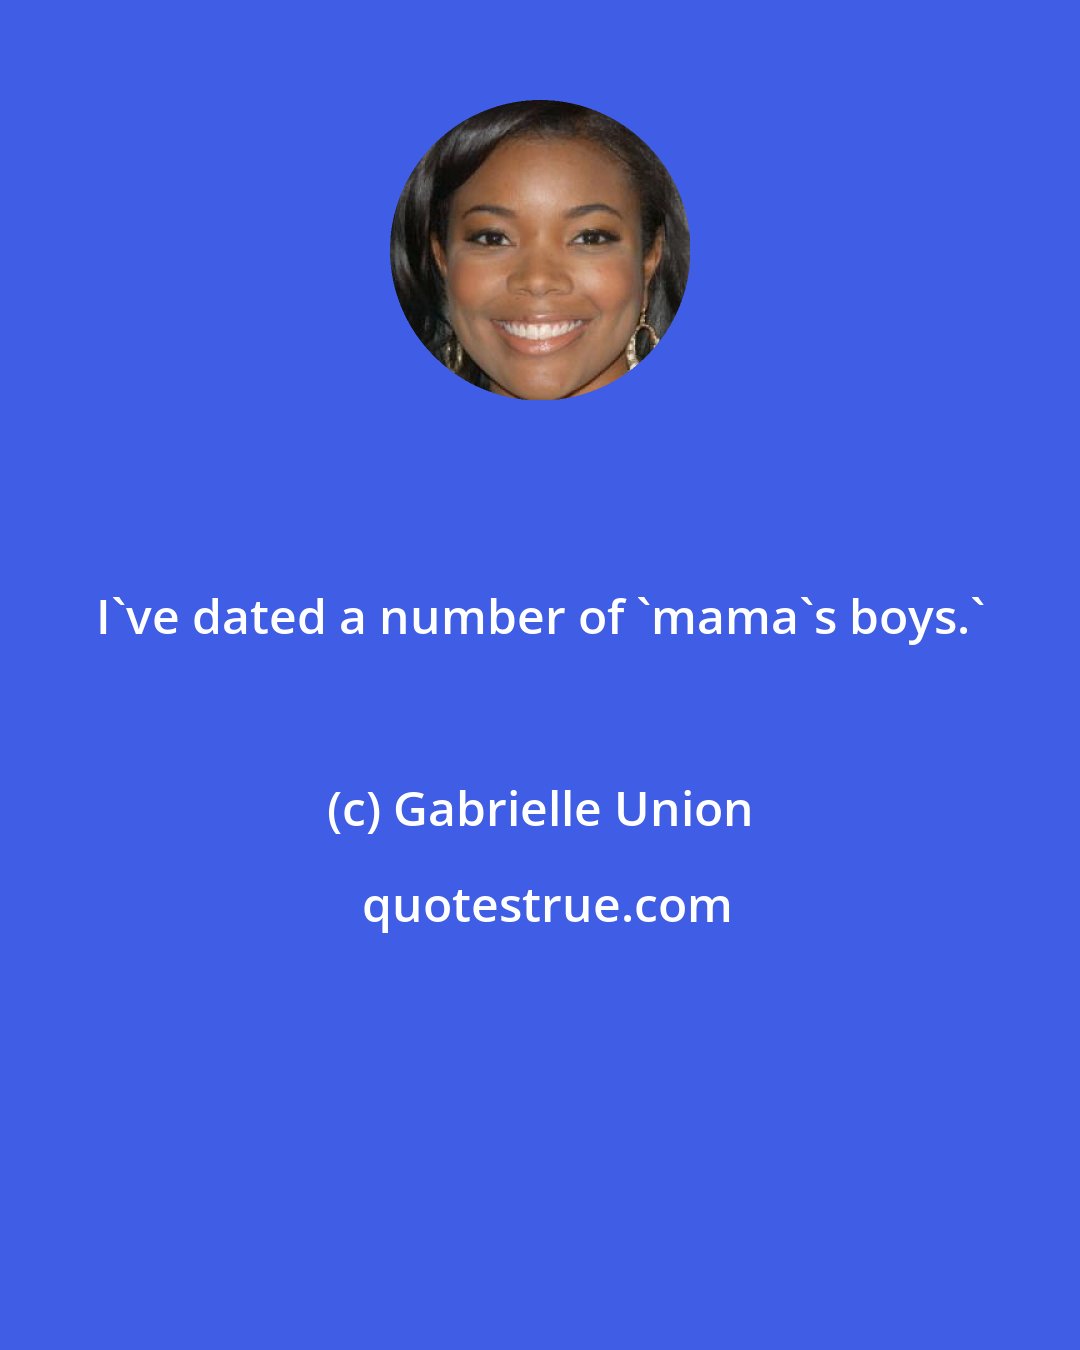 Gabrielle Union: I've dated a number of 'mama's boys.'